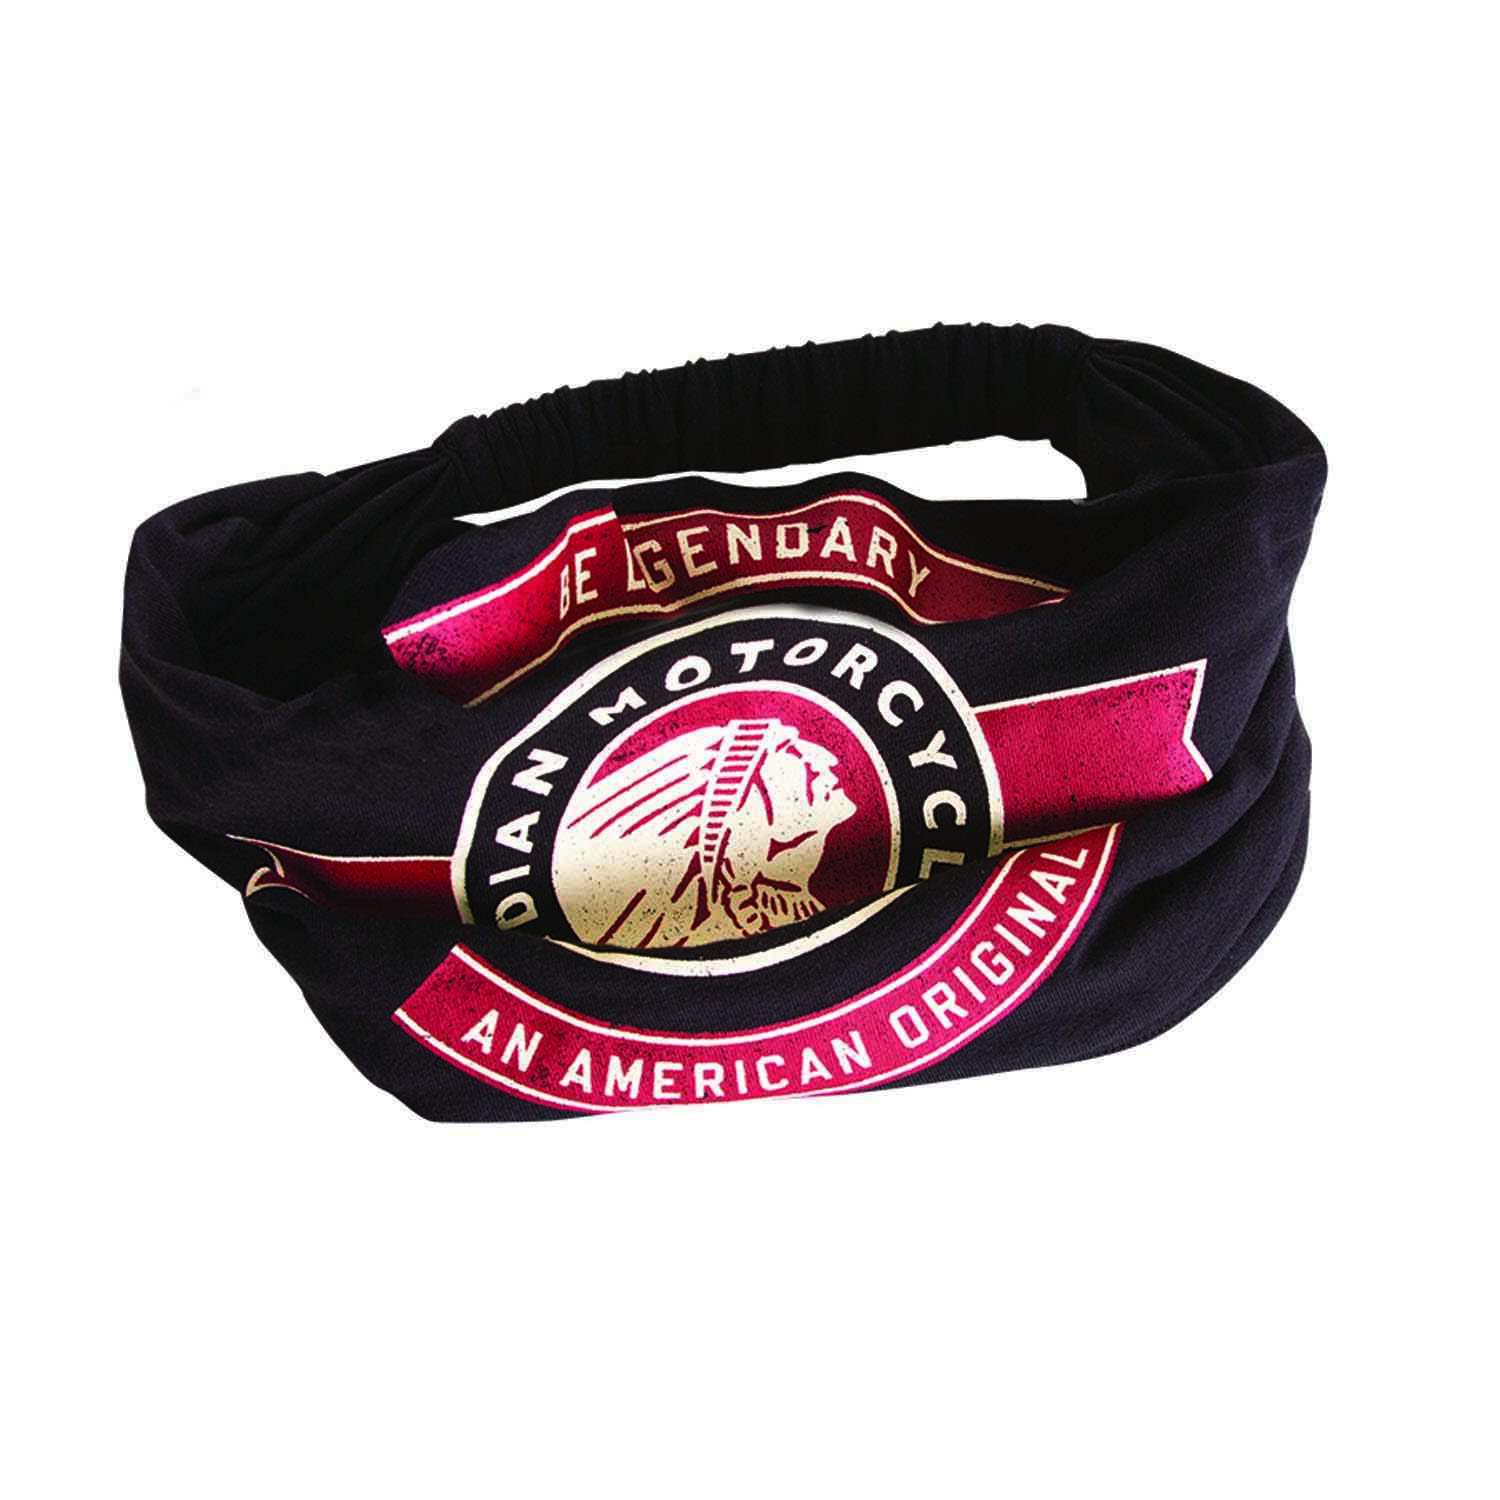 Be Legendary Close-Fit Riding Headband, Black | Indian Motorcycle